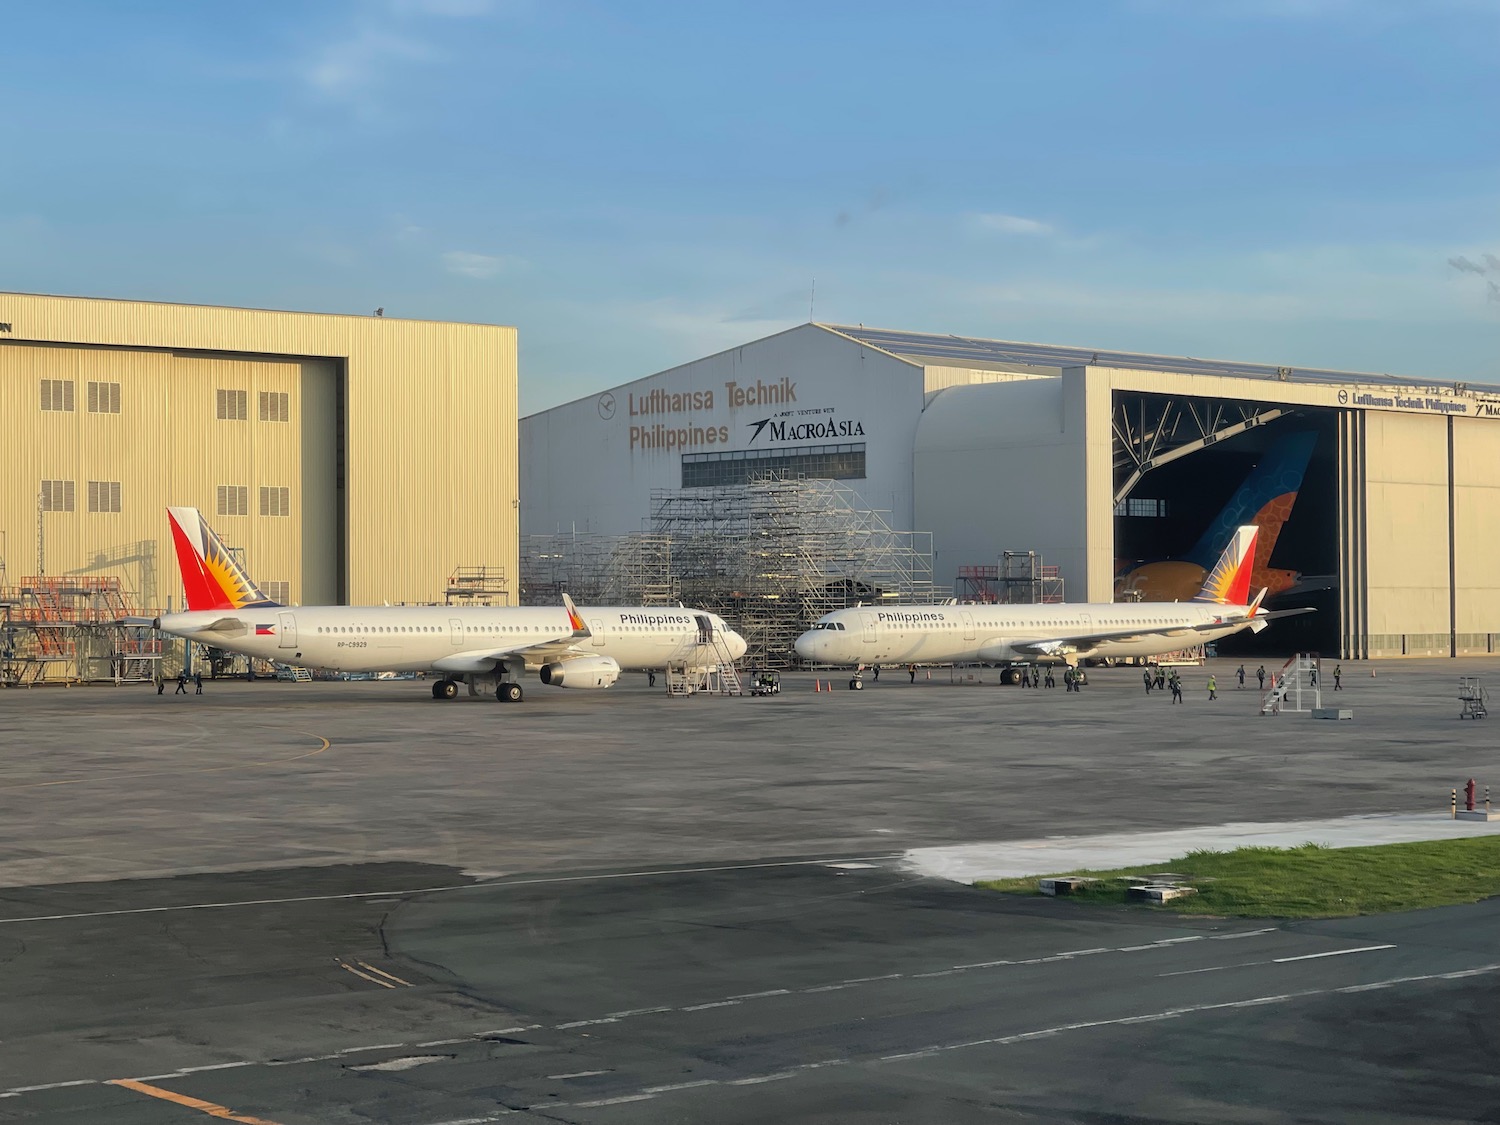 airplanes parked in a hangar